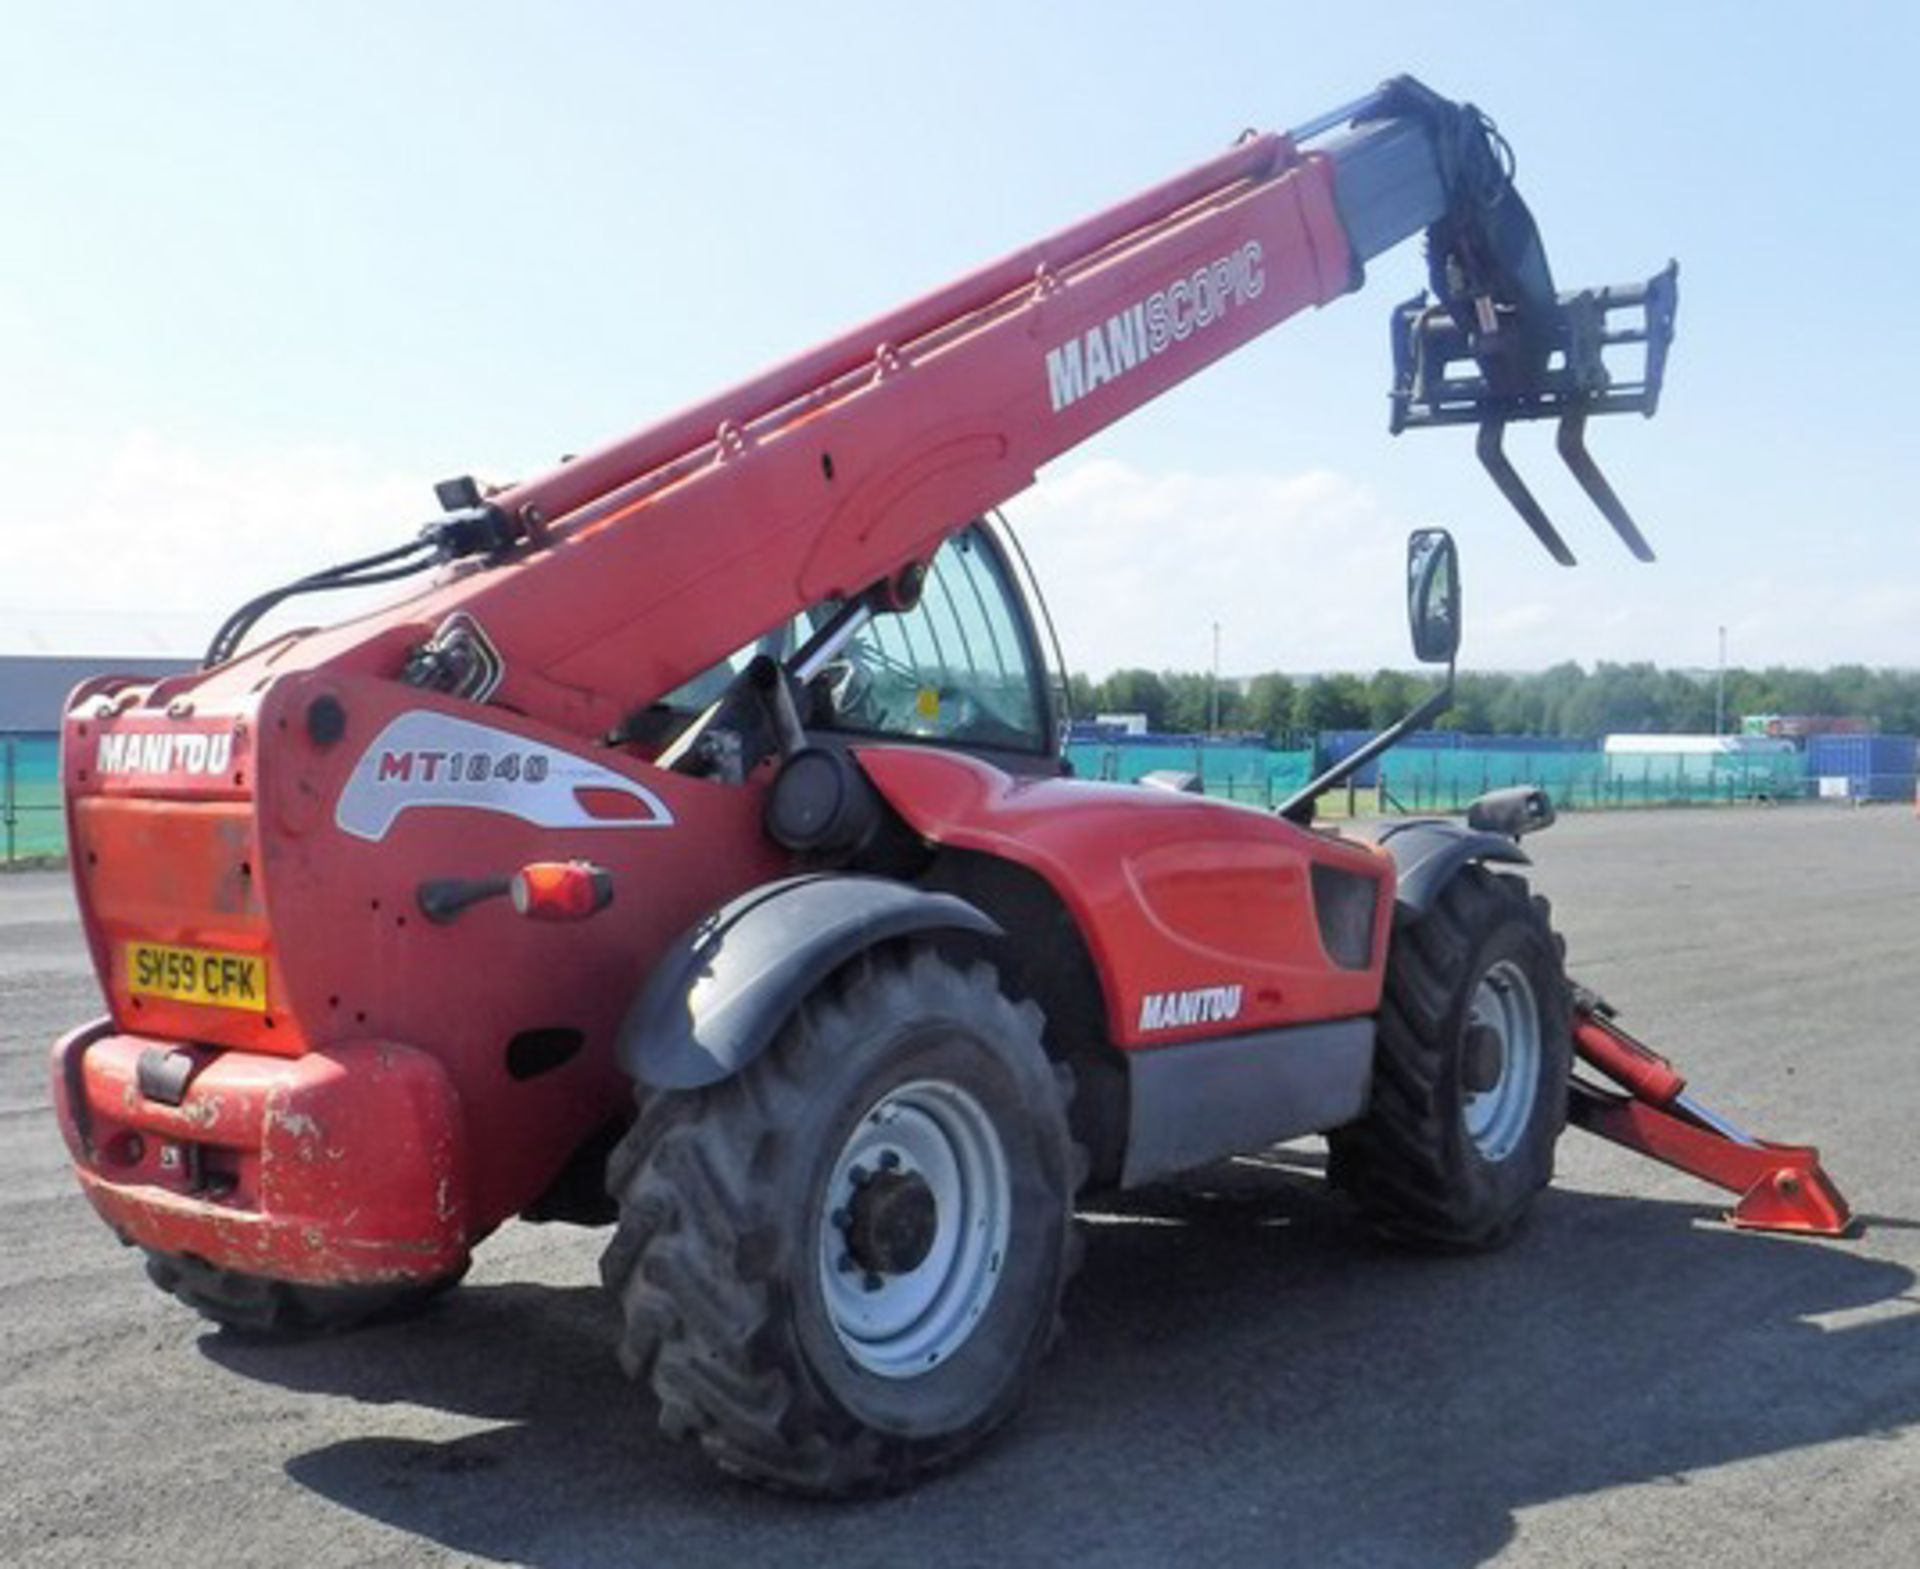 2009 MANITOU MT1840, Reg - SY59CFK. S/N - 258408. 4209 hrs (not verified). C/W set of forks - Image 10 of 13